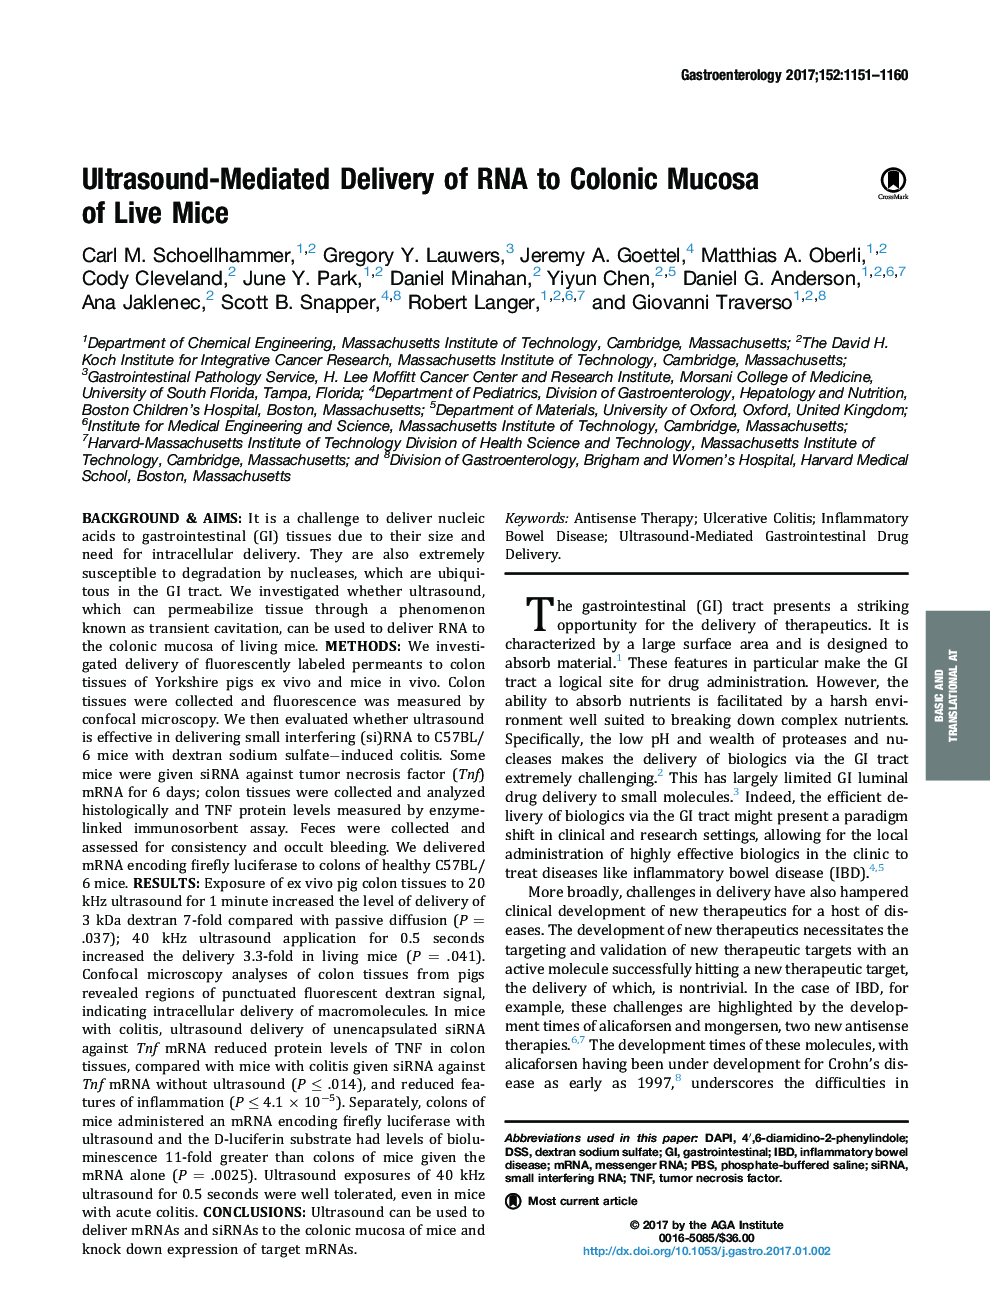 Ultrasound-Mediated Delivery of RNA to Colonic Mucosa of LiveÂ Mice